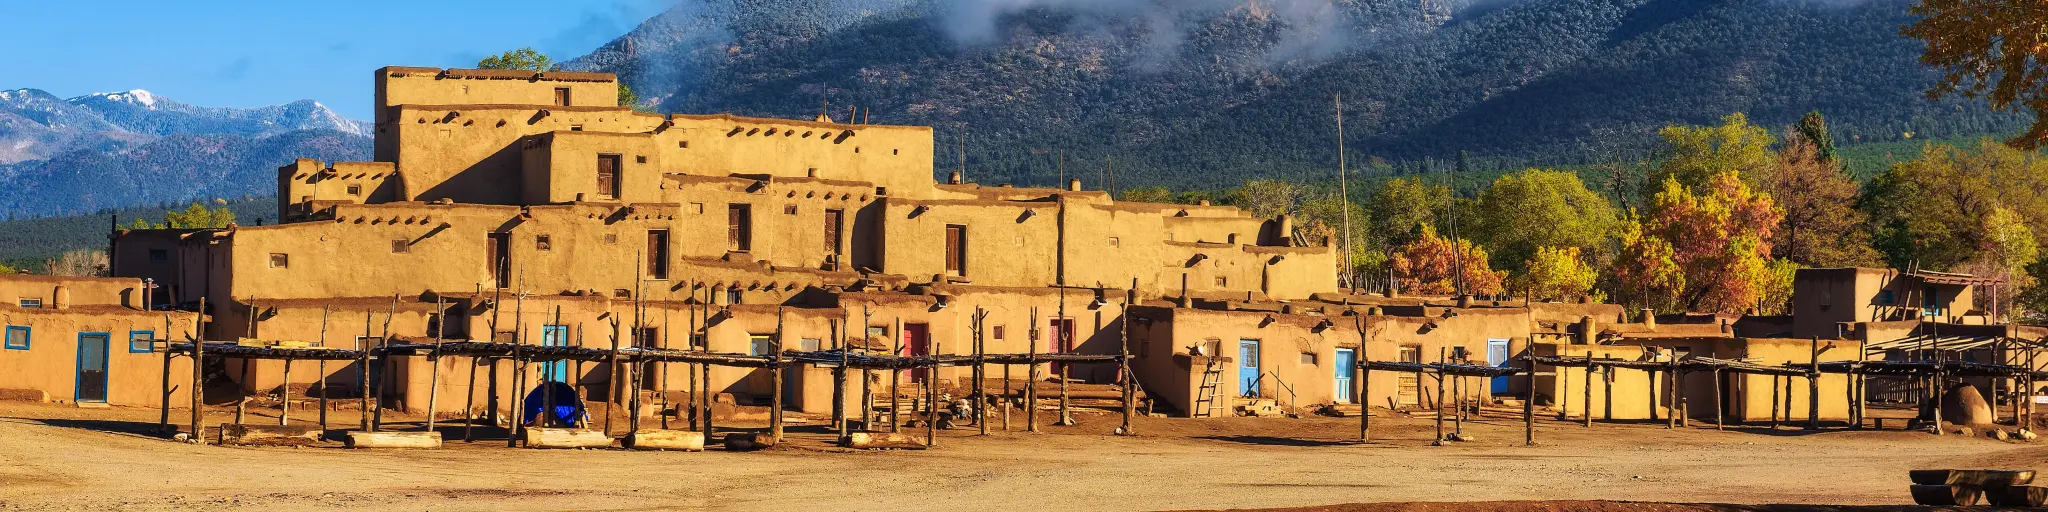 Ancient dwellings of Taos, with a hill in the background on a sunny day with a few clouds